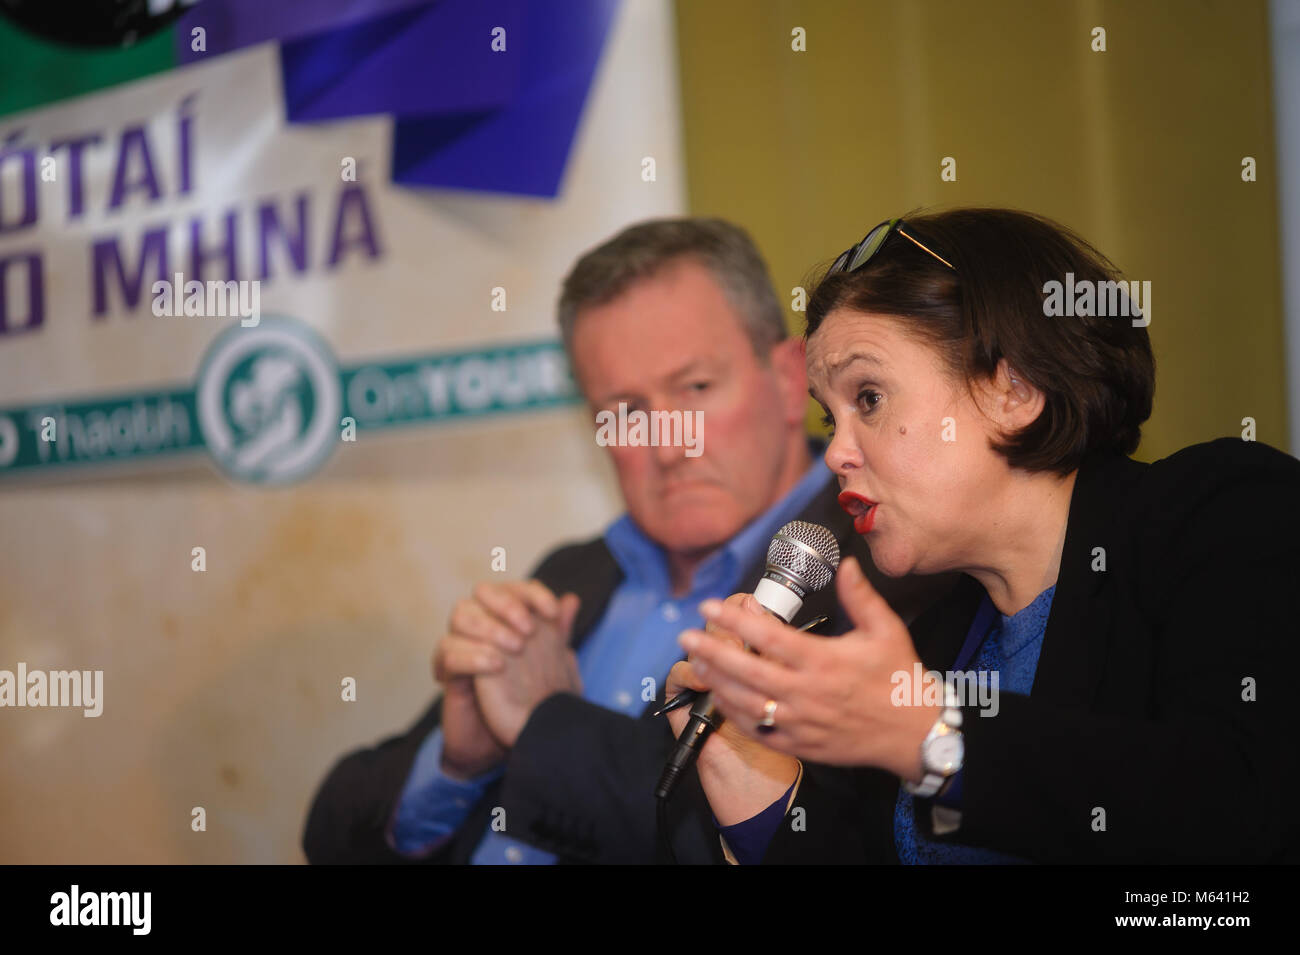 County Armagh, Northern Ireland. 27th Feb, 2018. Mary Lou McDonald, Sinn Fein President speaking at a public meeting at  Canal Court Newry Co.Armagh    27 February 2018   CREDIT: www.LiamMcArdle.com Credit: LiamMcArdle.com/Alamy Live News Stock Photo